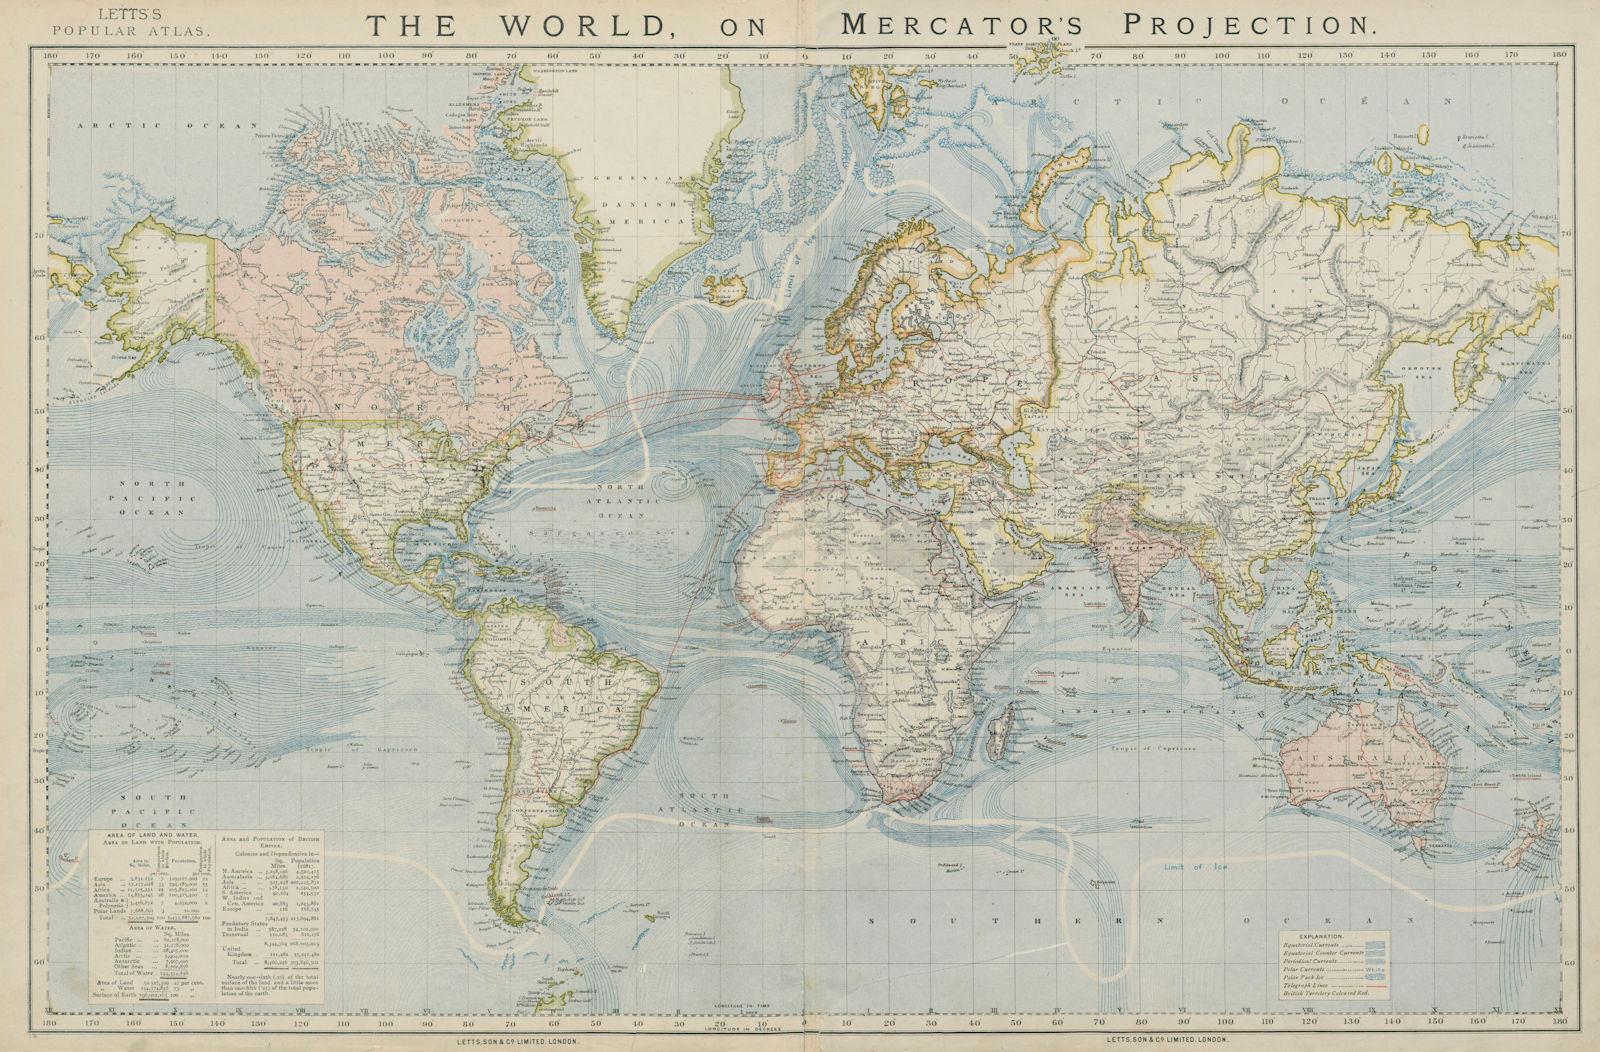 WORLD ON MERCATOR'S PROJECTION. British Empire. Telegraph cables. LETTS 1884 map